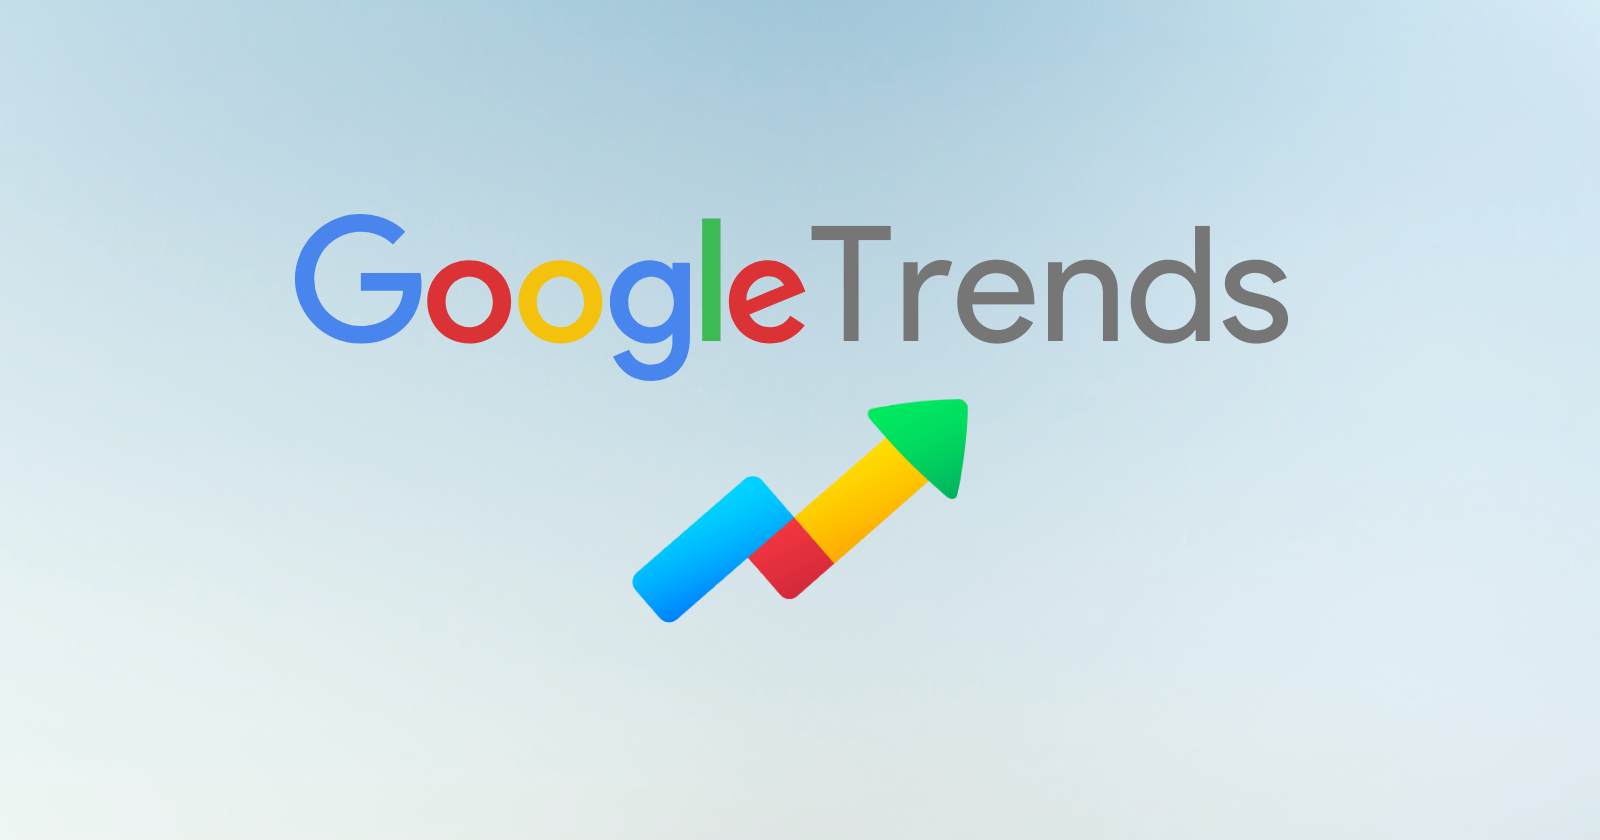 What is the best way to use Google Trends for SEO?